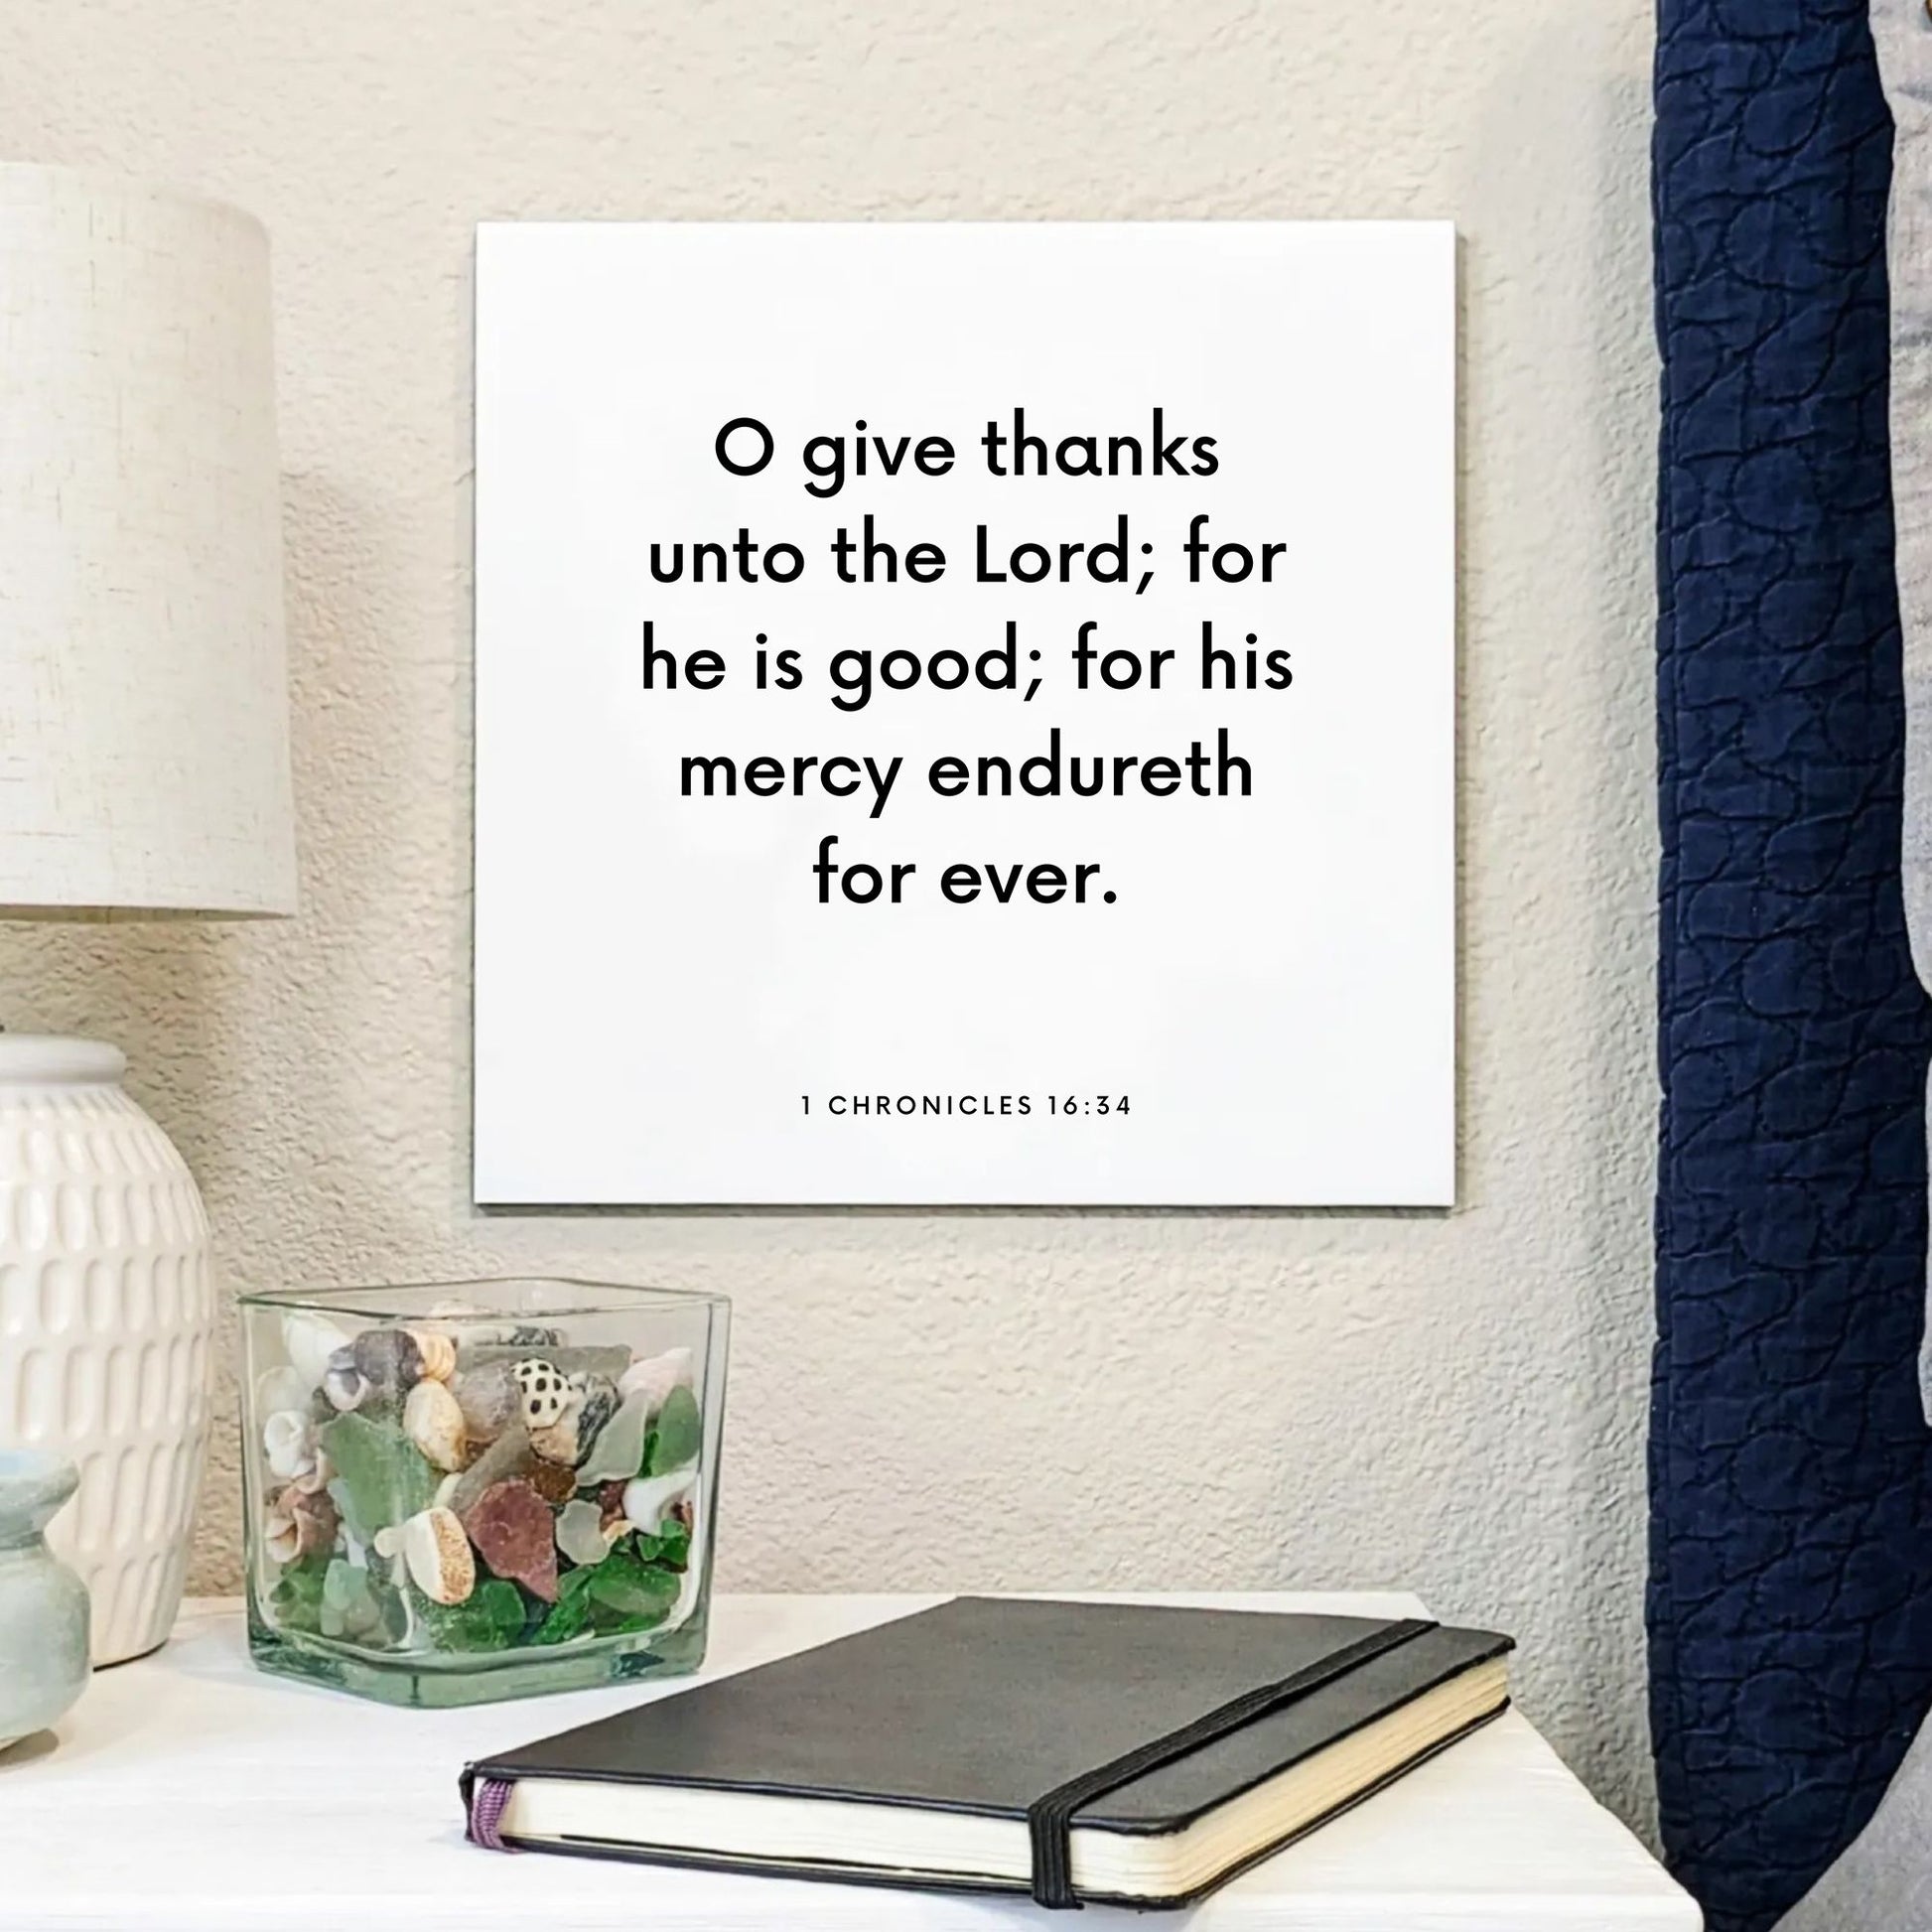 Bedside mouting of the scripture tile for 1 Chronicles 16:34 - "O give thanks unto the Lord; for he is good"